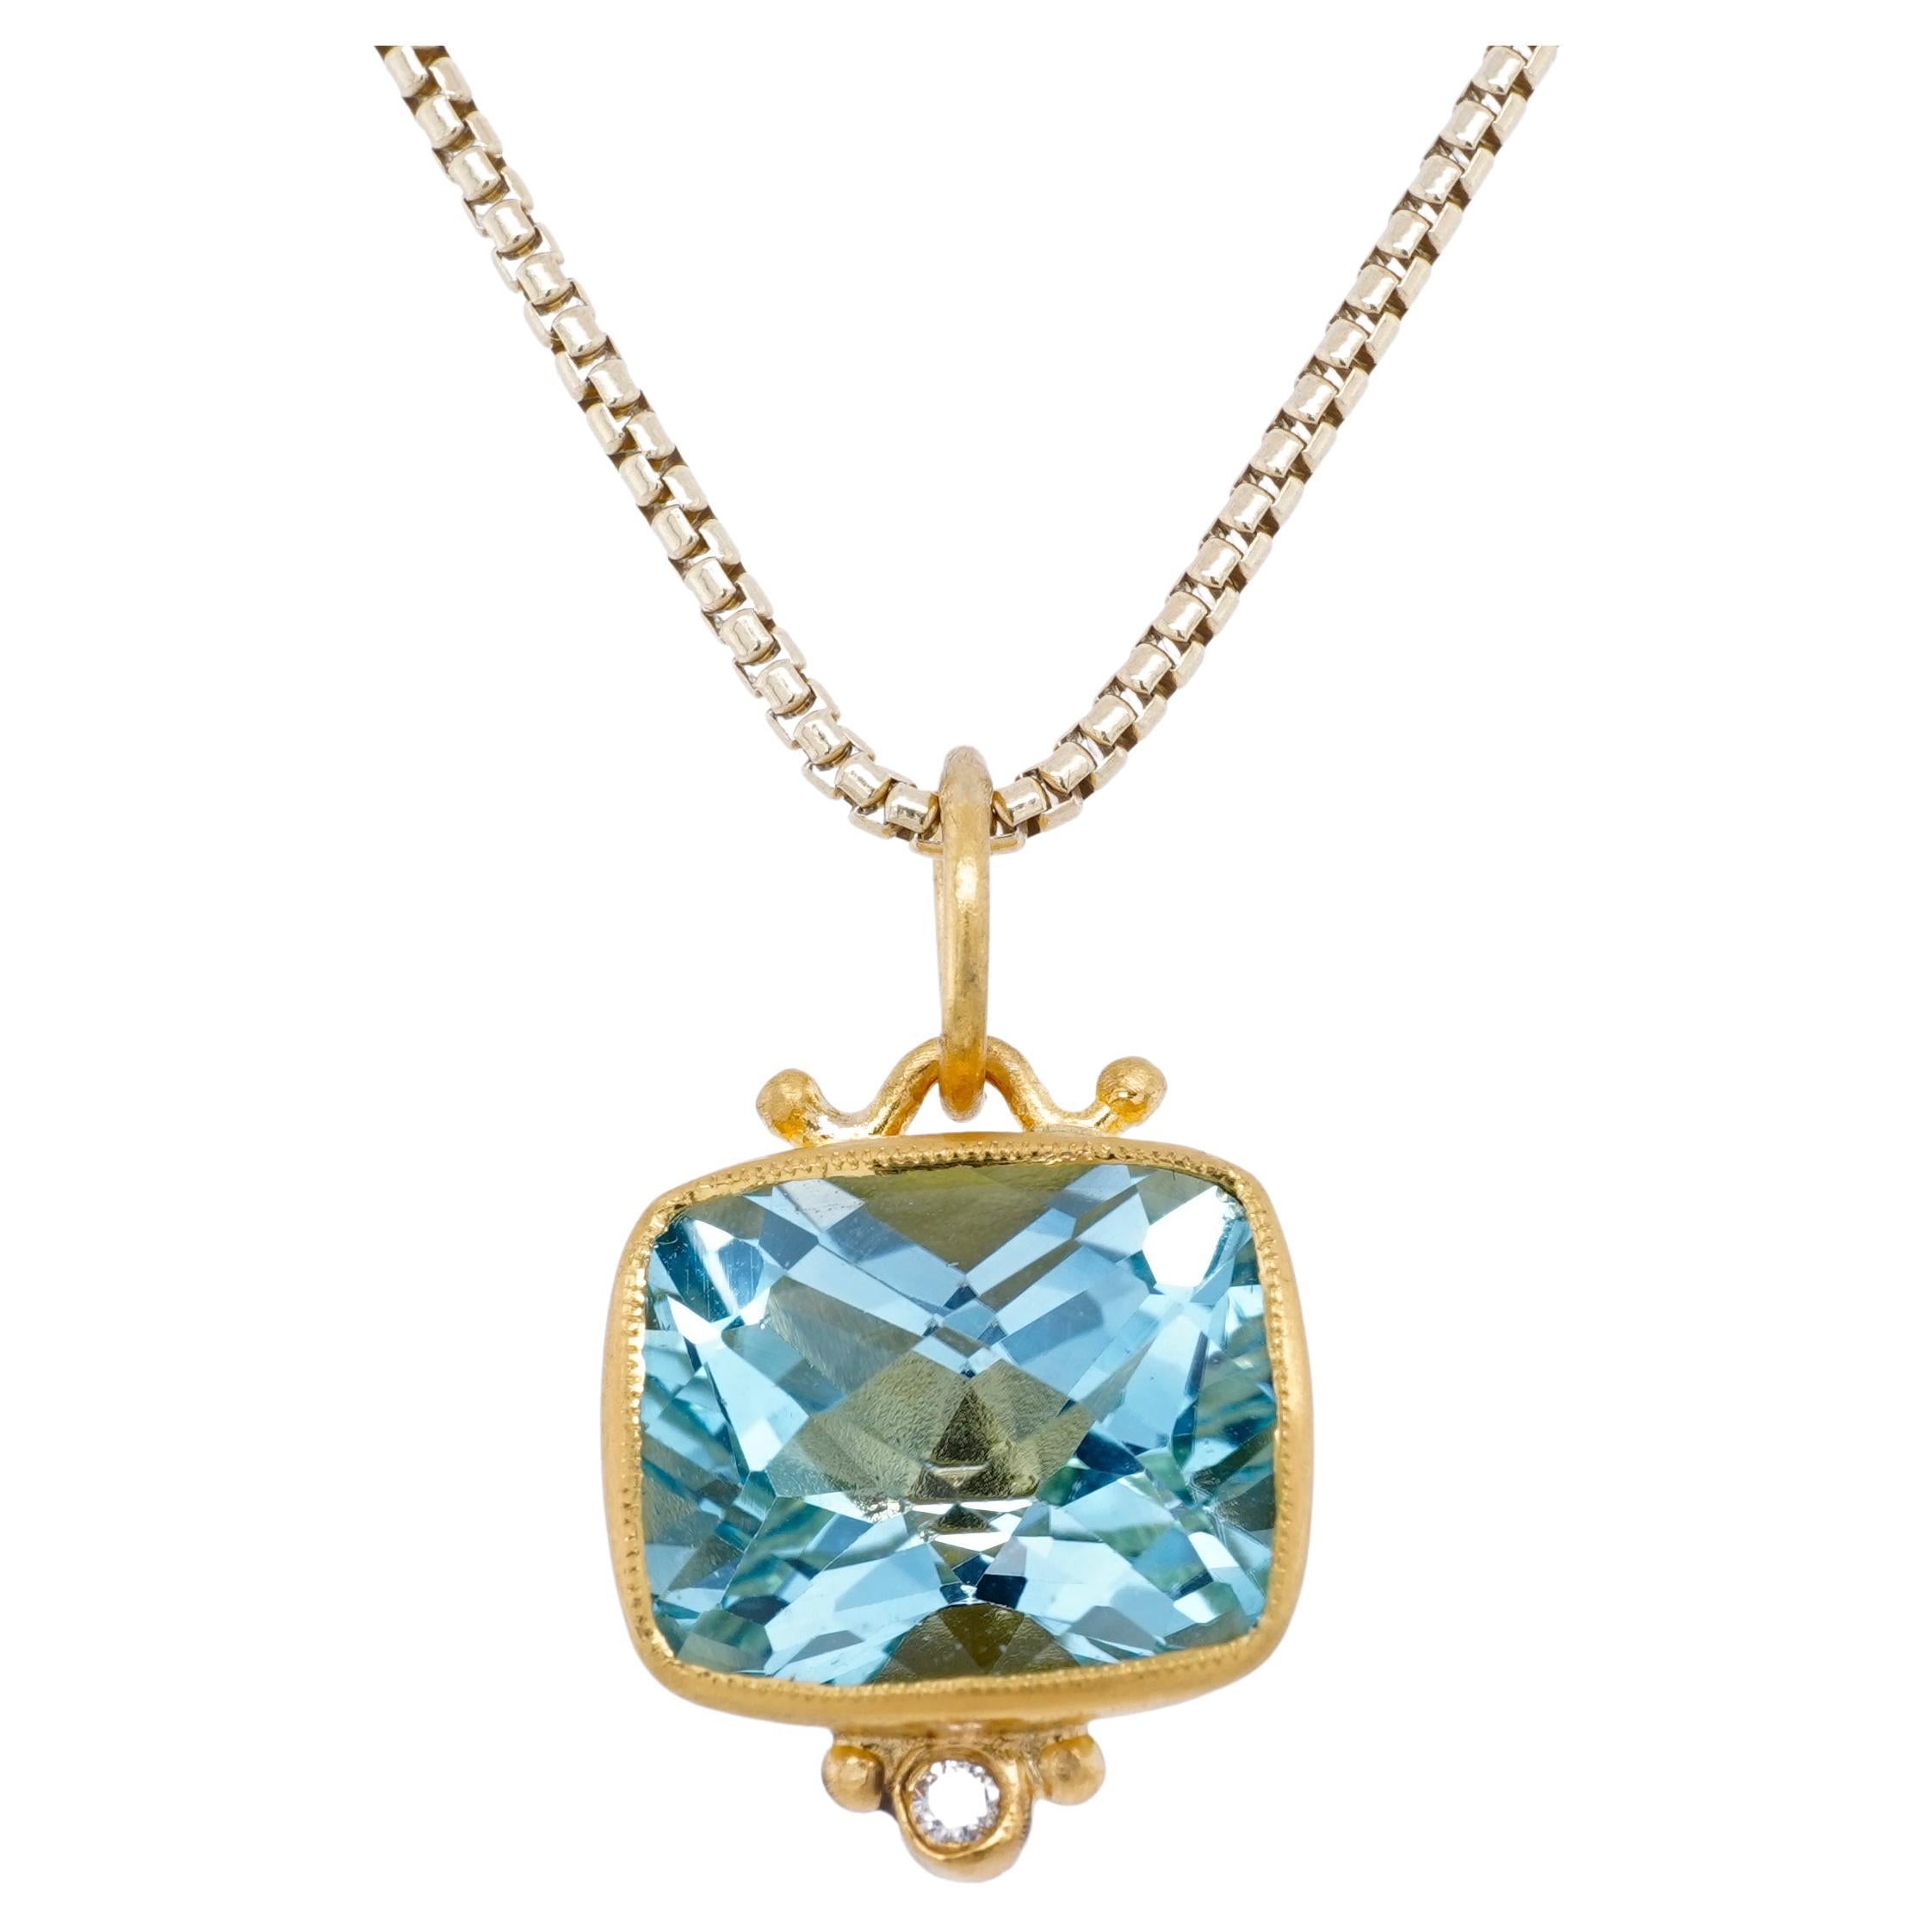 Faceted Checkerboard Bright Blue Topaz Pendant, 24K Solid Gold Necklace Pendant